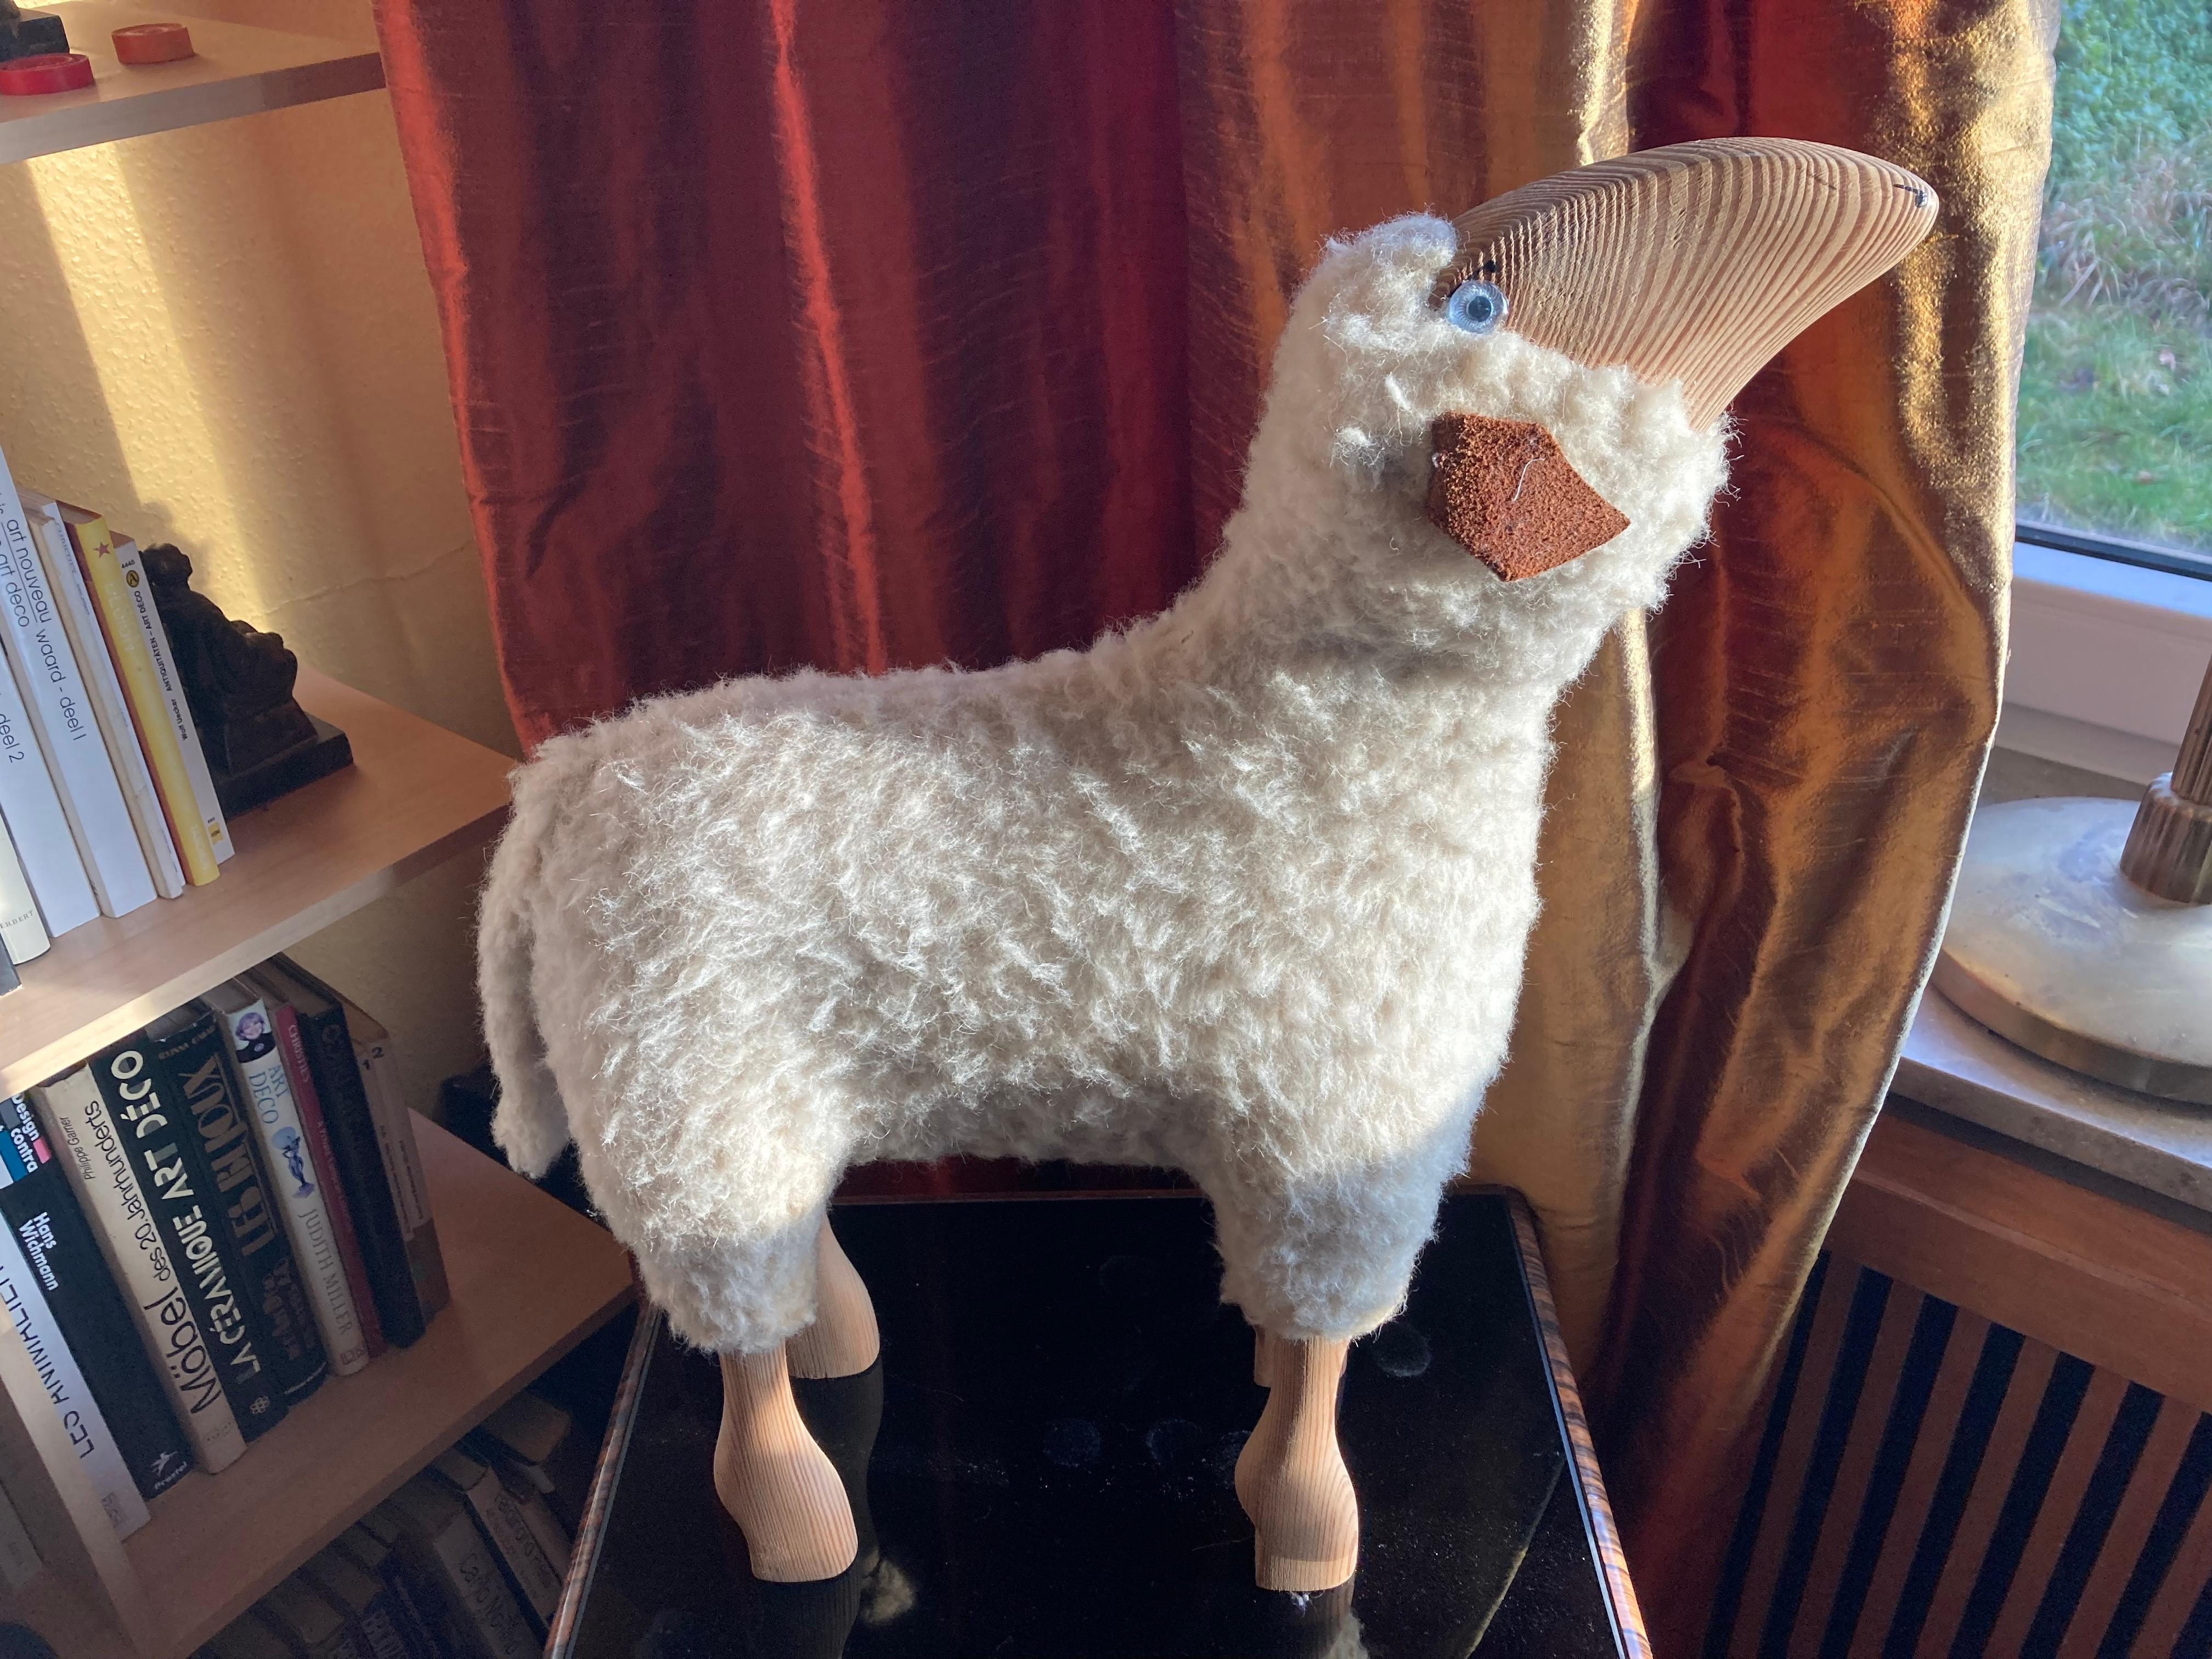 Rare wool lamb by Hanns-Peter Krafft. Germany 1970s. The lamb was handmade from original white wool, leather and solid high-quality beech wood. The entire production took place in Germany in the 1970s.
The sheeps originally served as a stool for